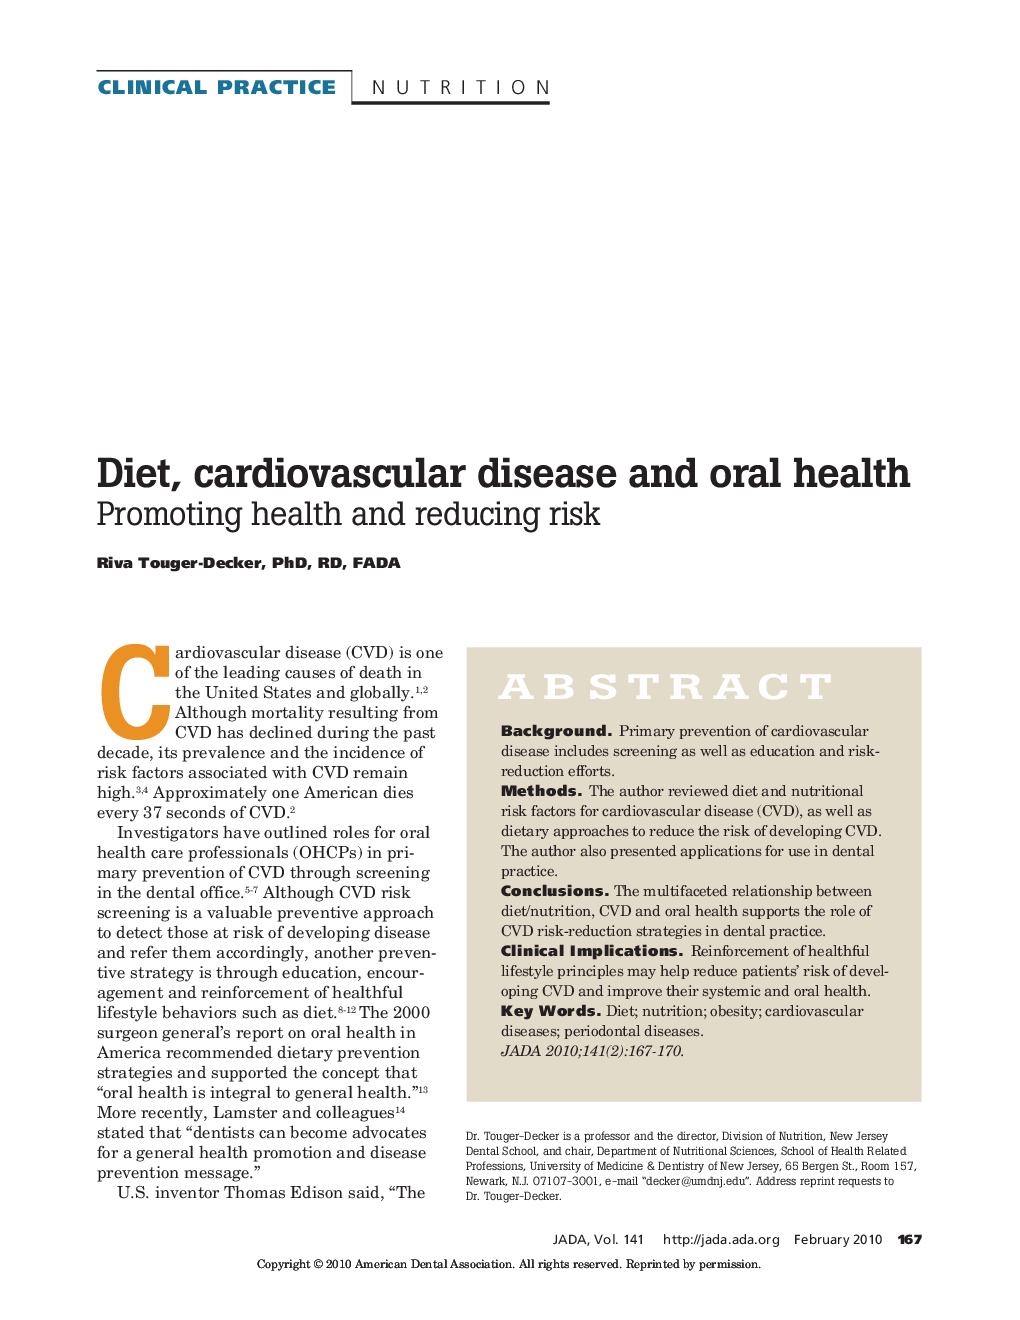 Diet, cardiovascular disease and oral health : Promoting health and reducing risk